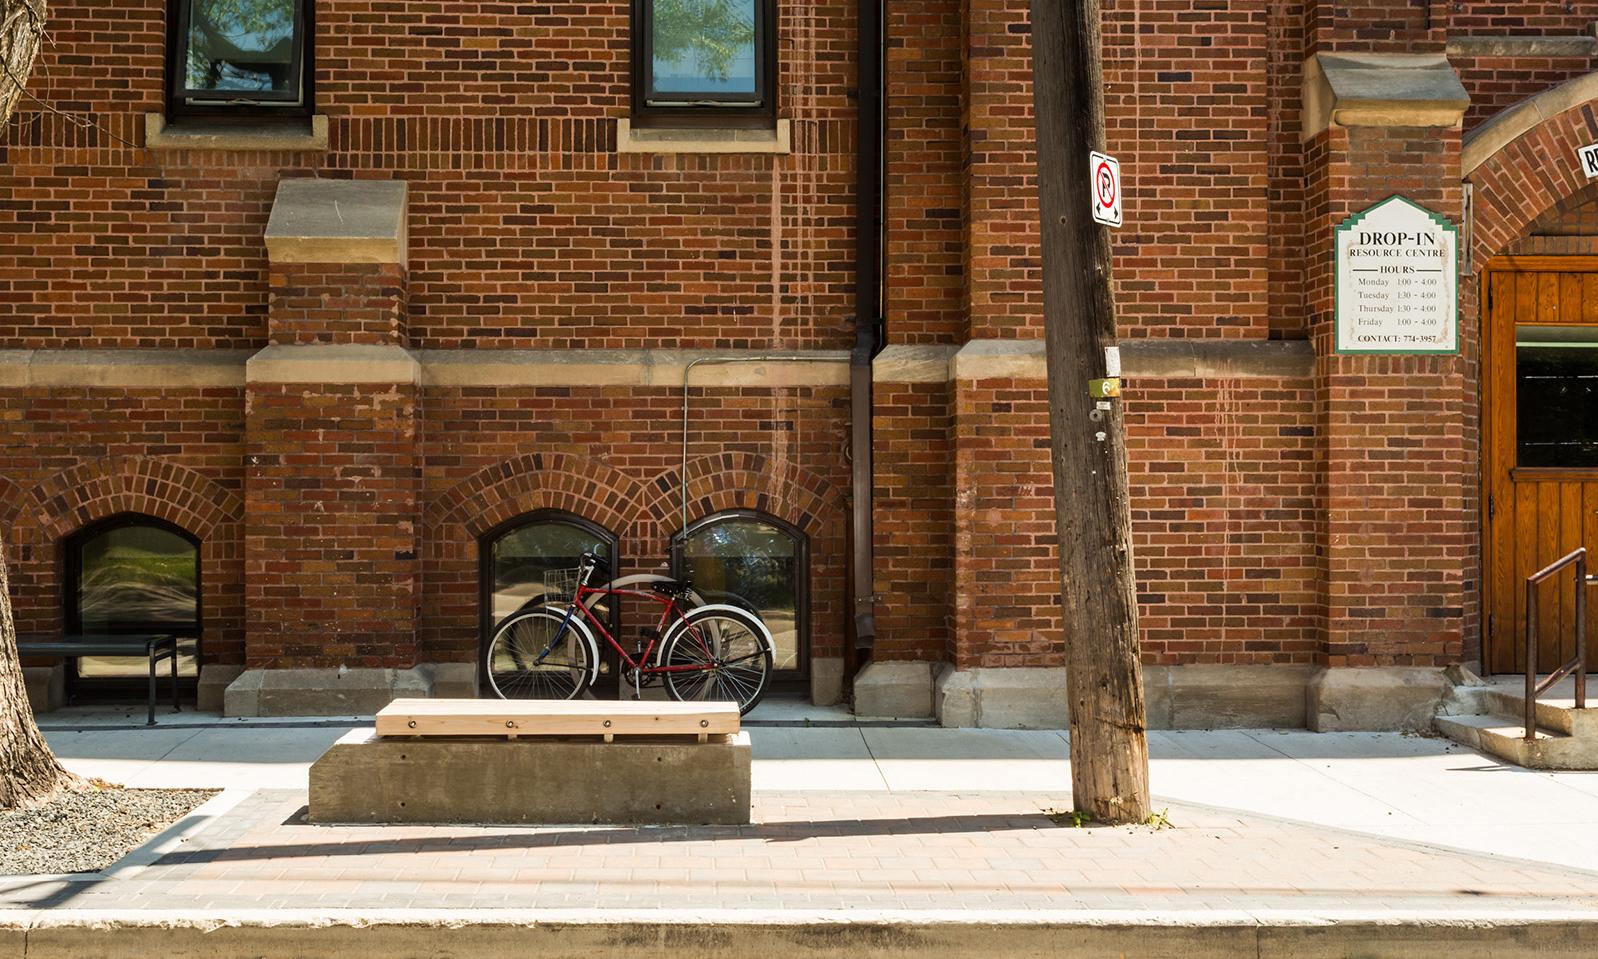 St. Matthew’s WestEnd Commons. Exterior side view of the building showing the sidewalk, bike rack and bench.